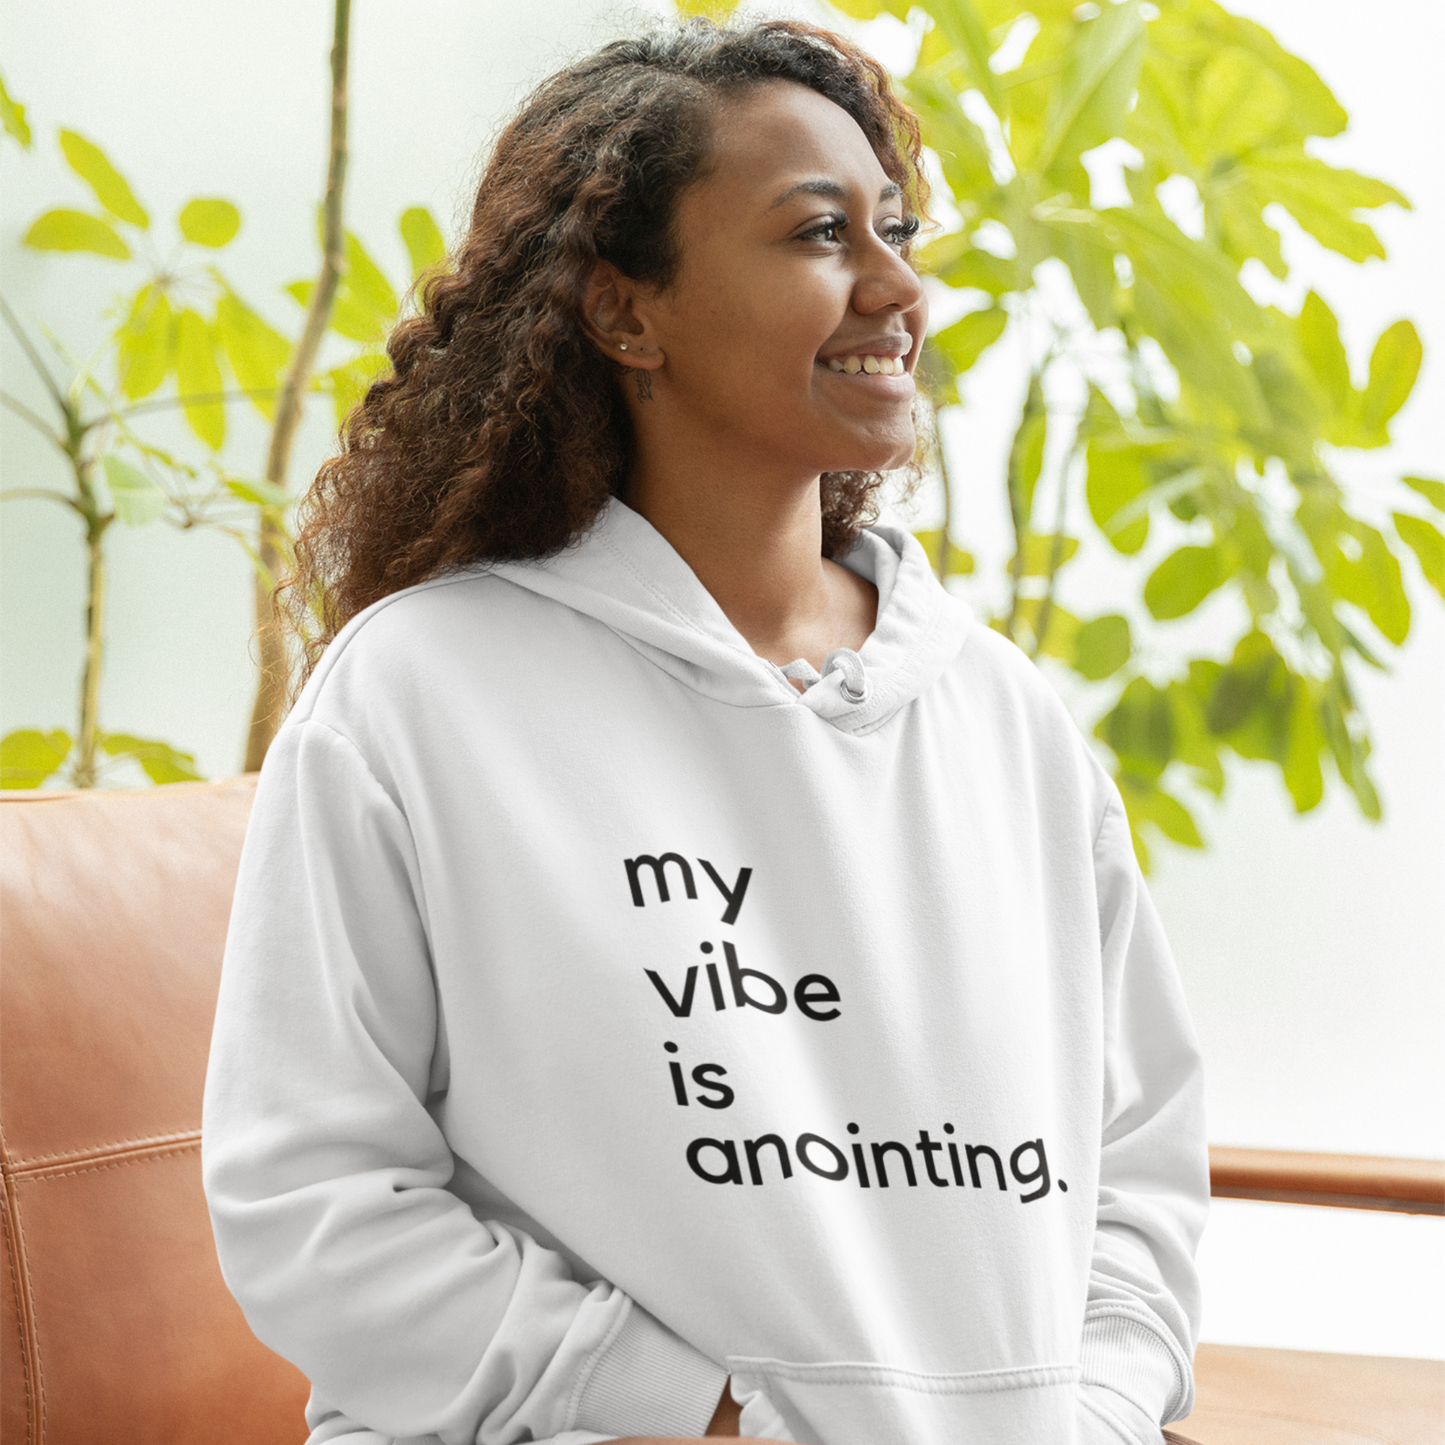 My Vibe is Anointing (Graphic Black Text) Unisex Heavy Blend Hoodie - Style: Gildan 18500